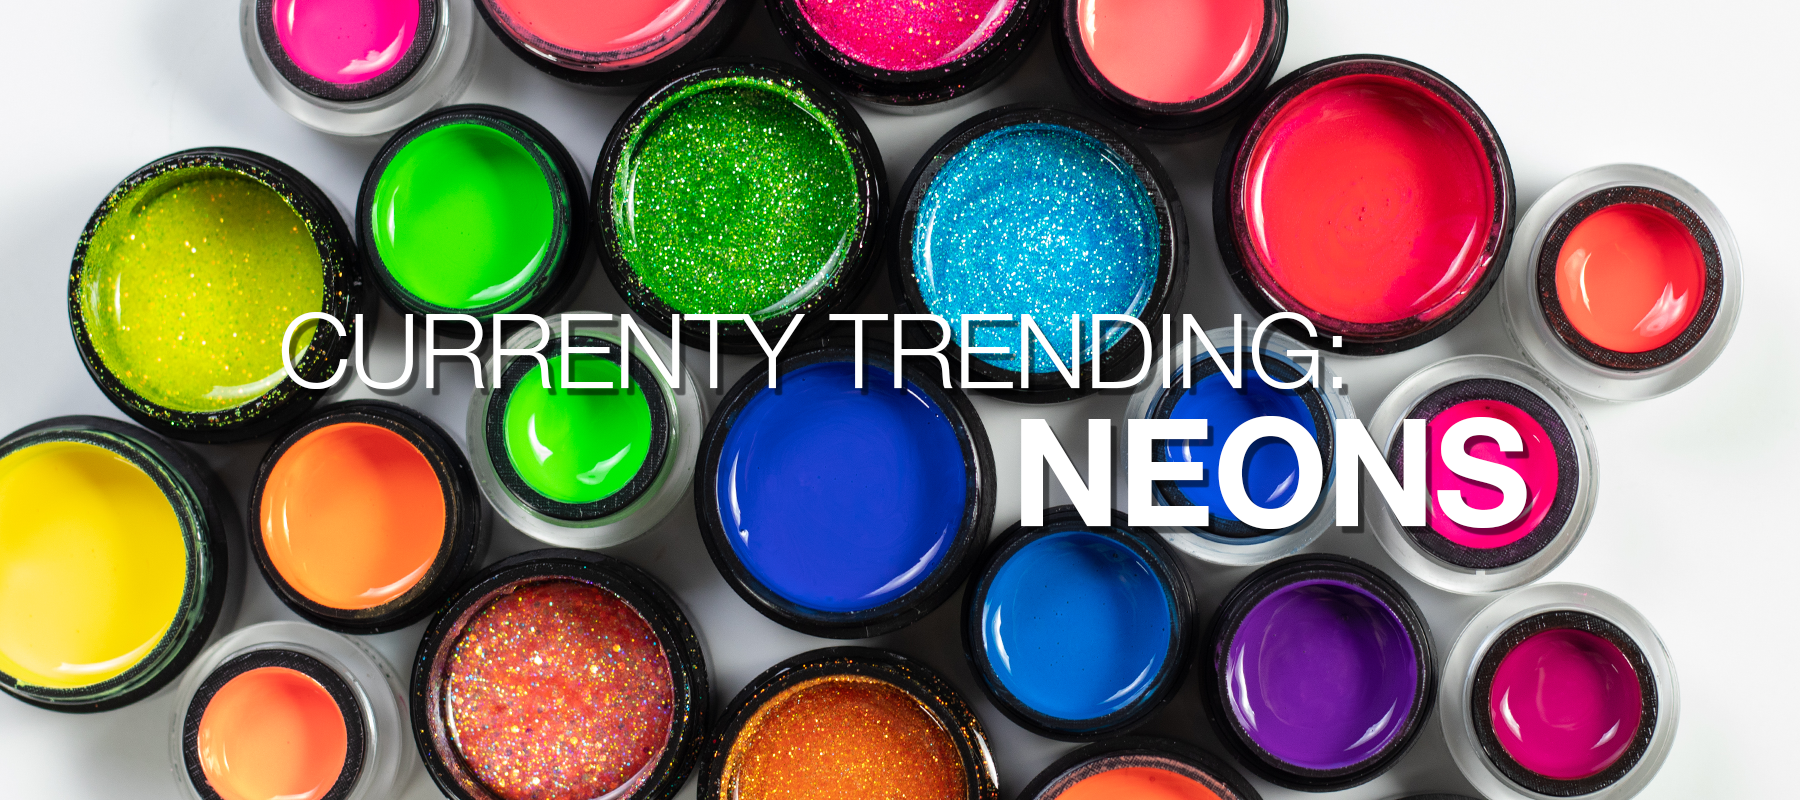 Bright, Bold & Neon Gel Nail Colors are Trending + Neons by Light Elegance